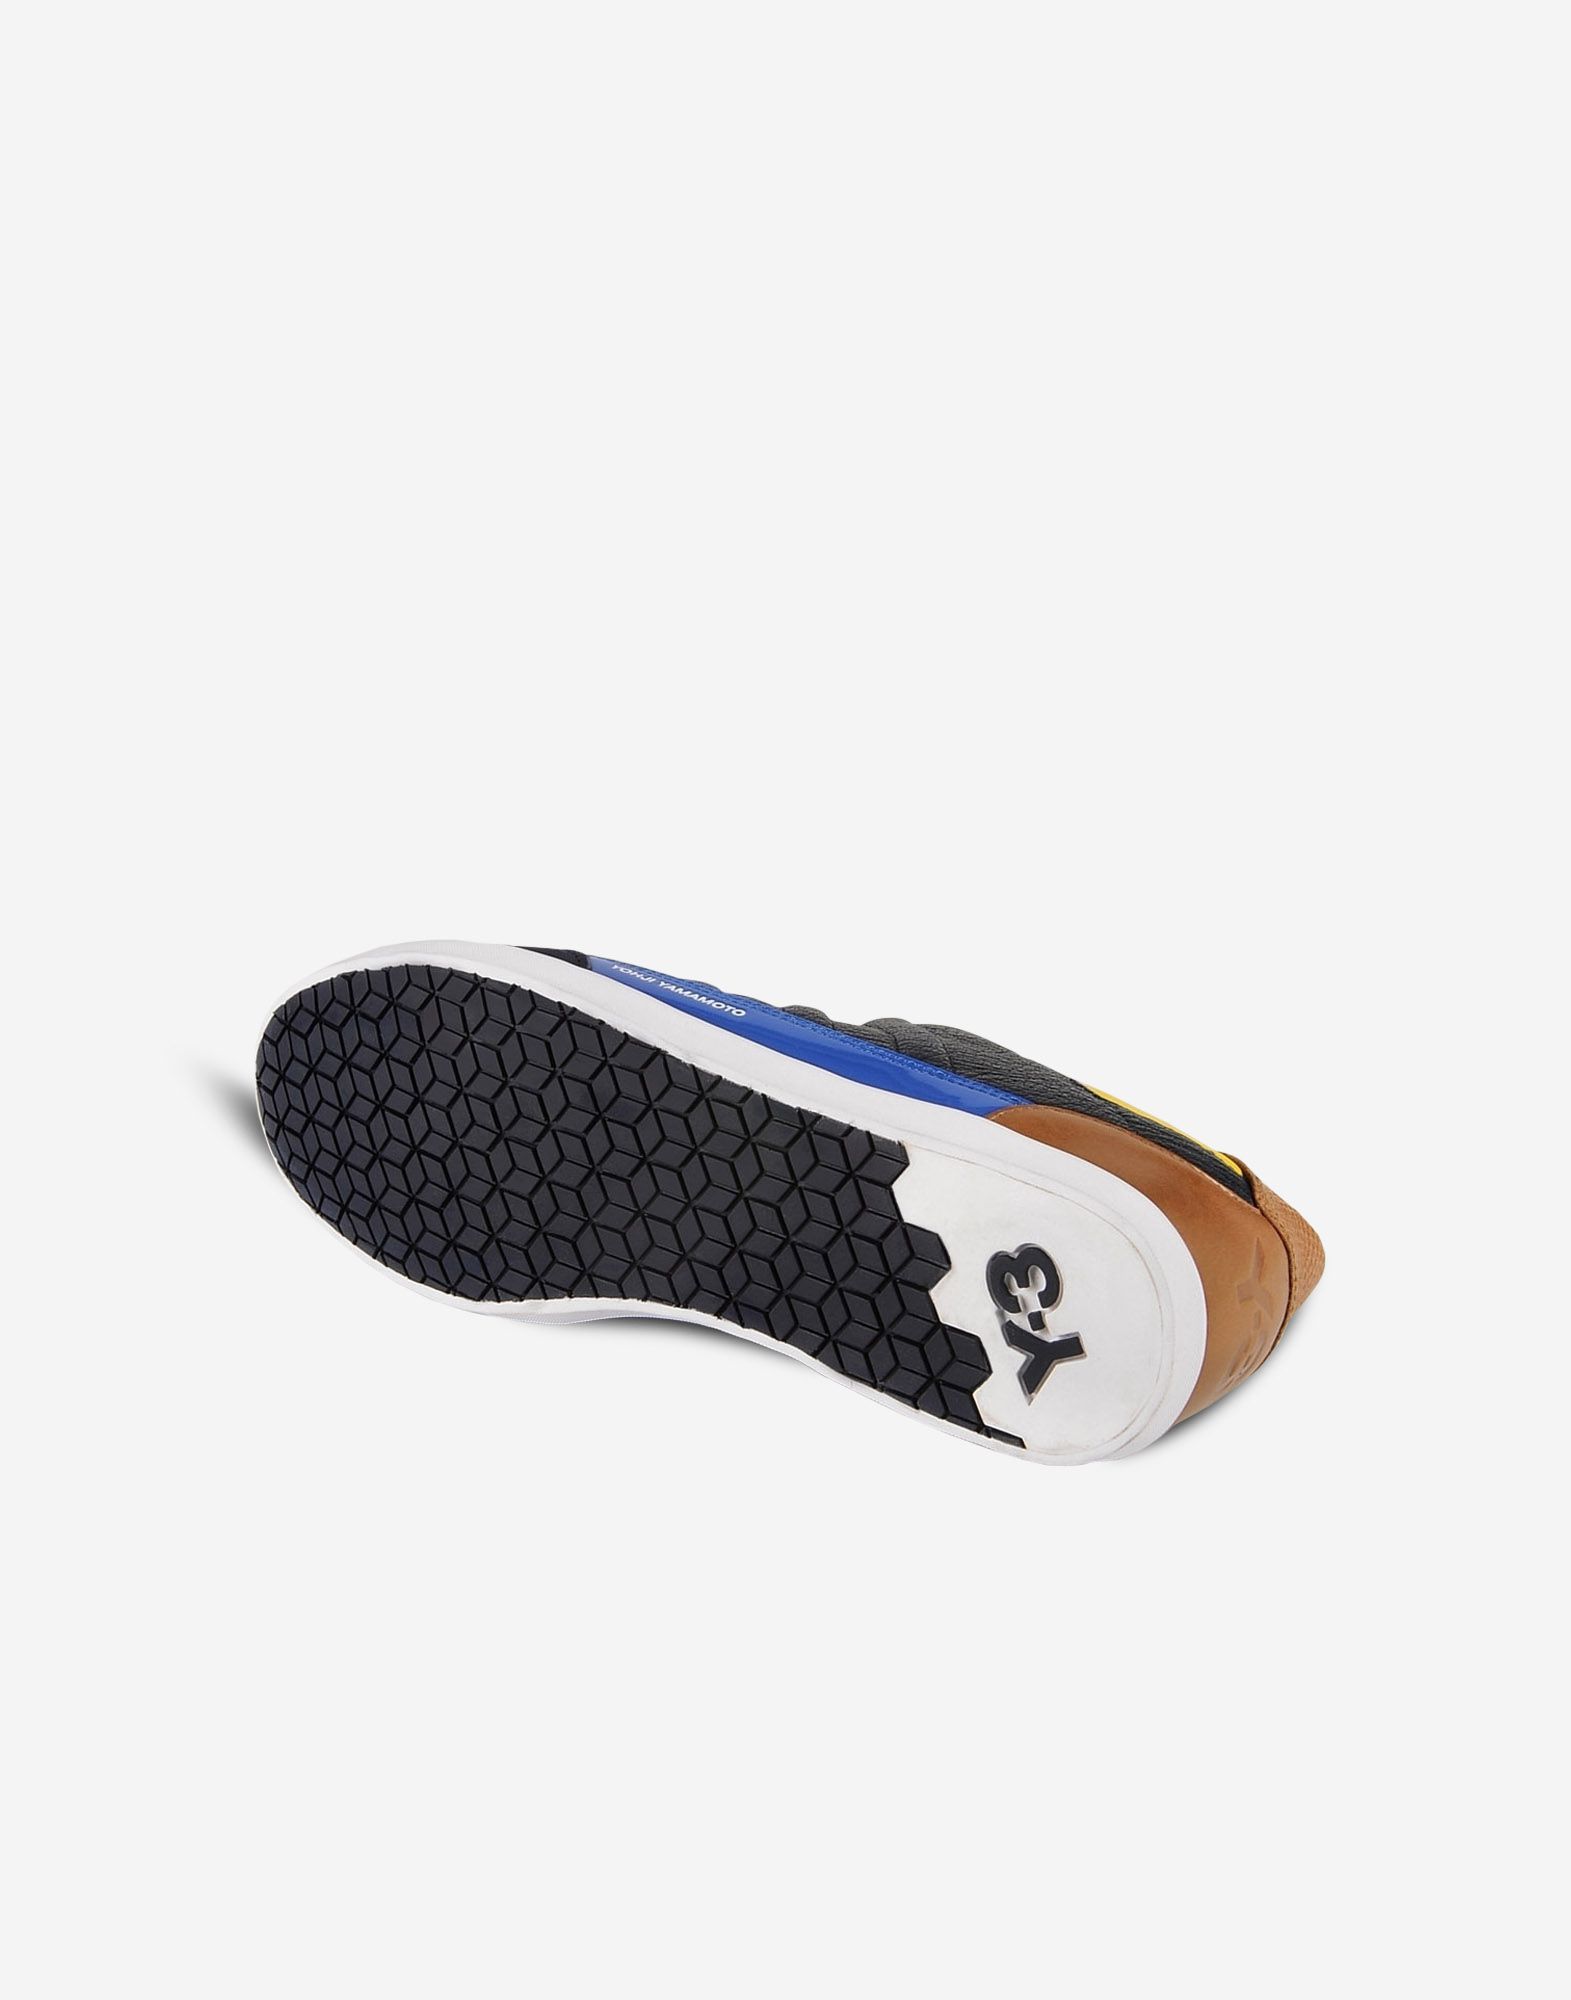 Y 3 Honja Low for Men | Adidas Y-3 Official Store